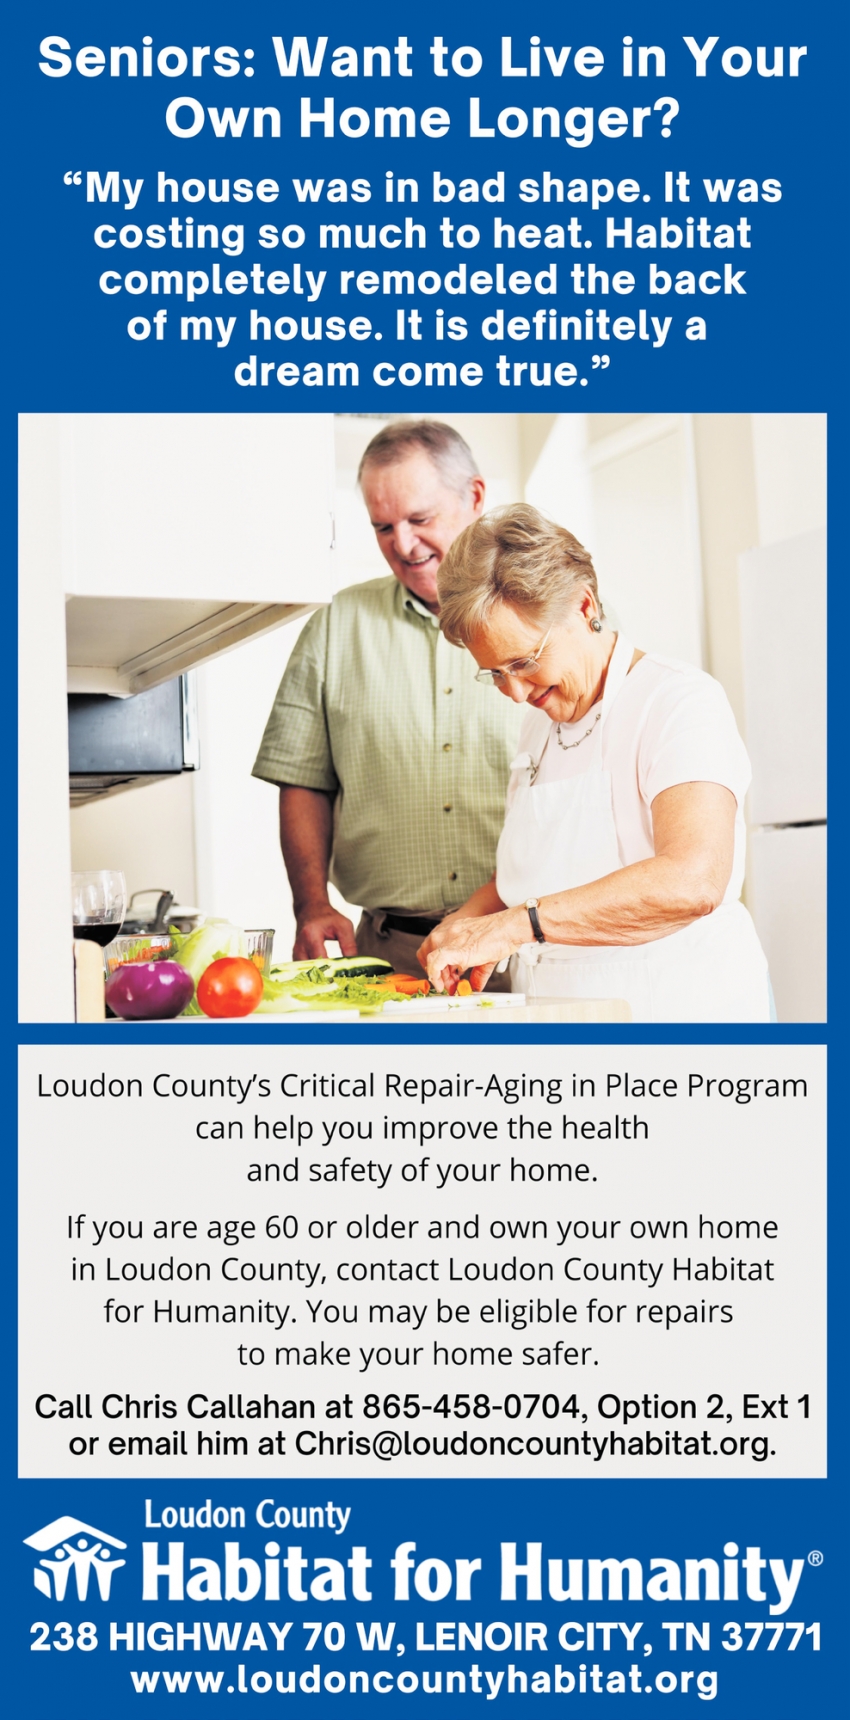 Seniors: Want To Live In Your Own Home Longer?